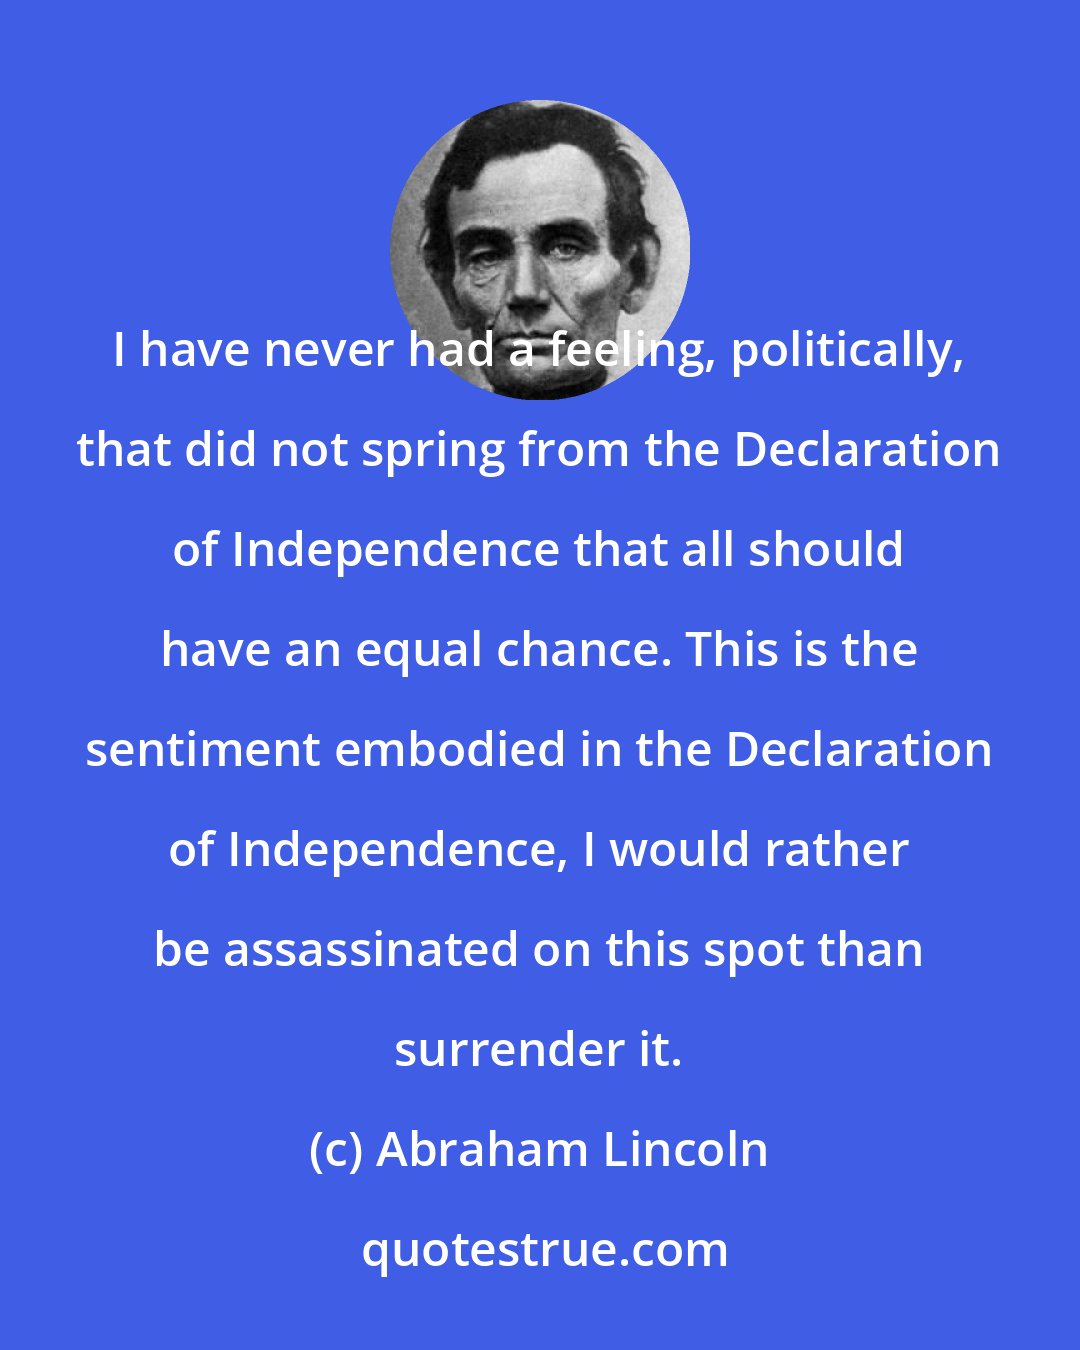 Abraham Lincoln: I have never had a feeling, politically, that did not spring from the Declaration of Independence that all should have an equal chance. This is the sentiment embodied in the Declaration of Independence, I would rather be assassinated on this spot than surrender it.